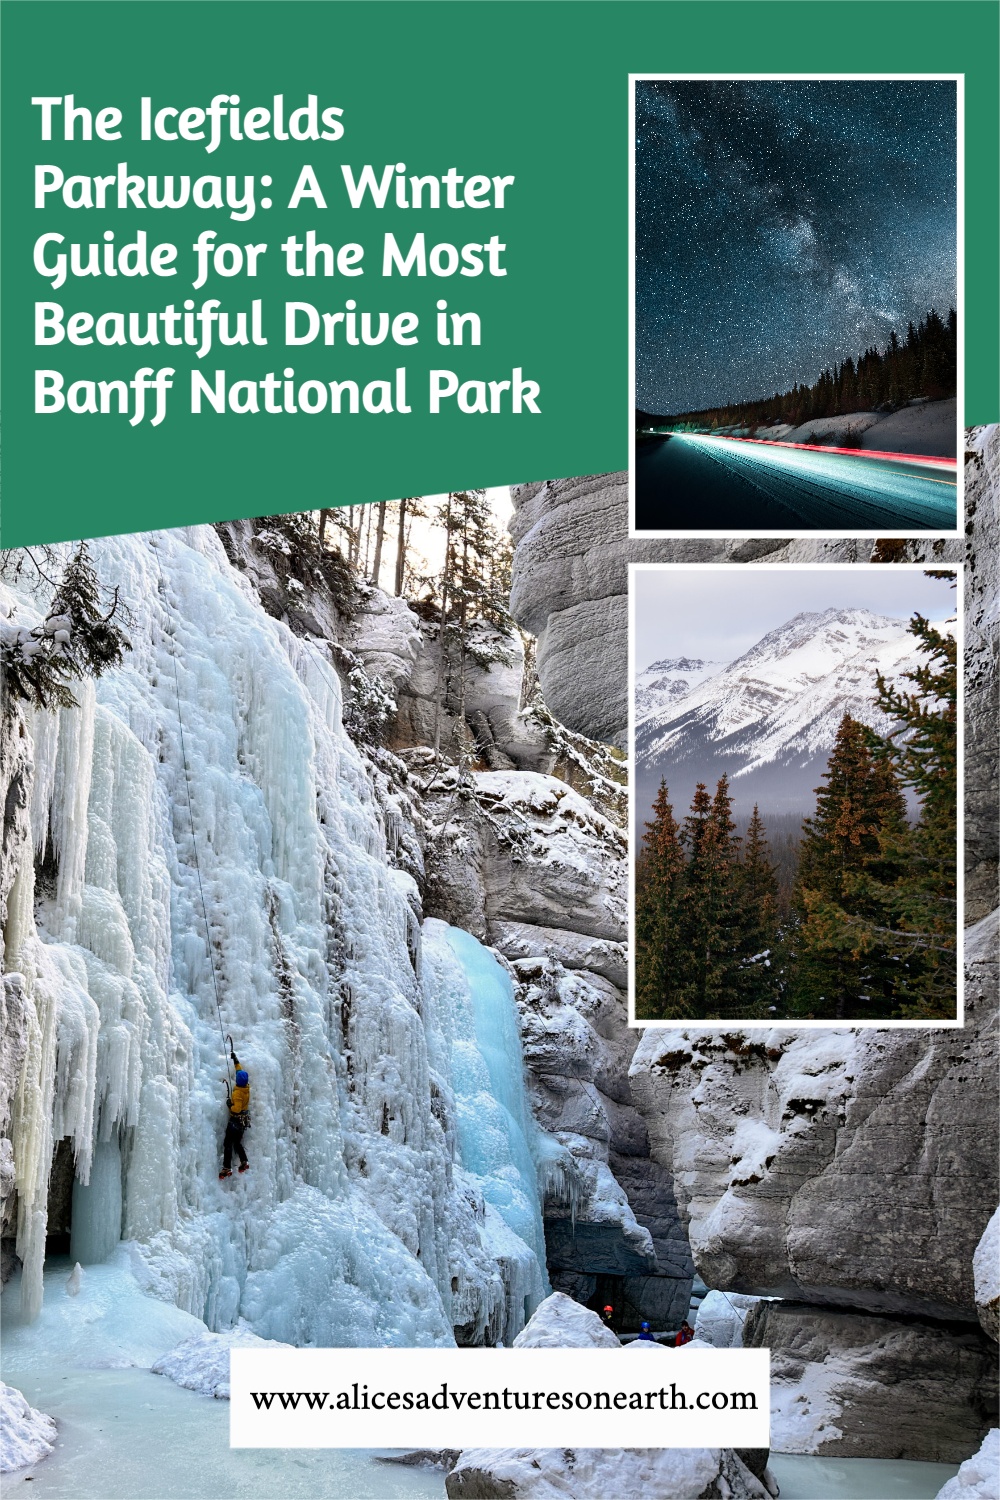 The icefields parkway is one of the best scenic drives in the world. come winter it becomes a frozen wonderland covered in snow, here are a few spots you won't want to miss stopping by along the way. #banff #jasper #canada 